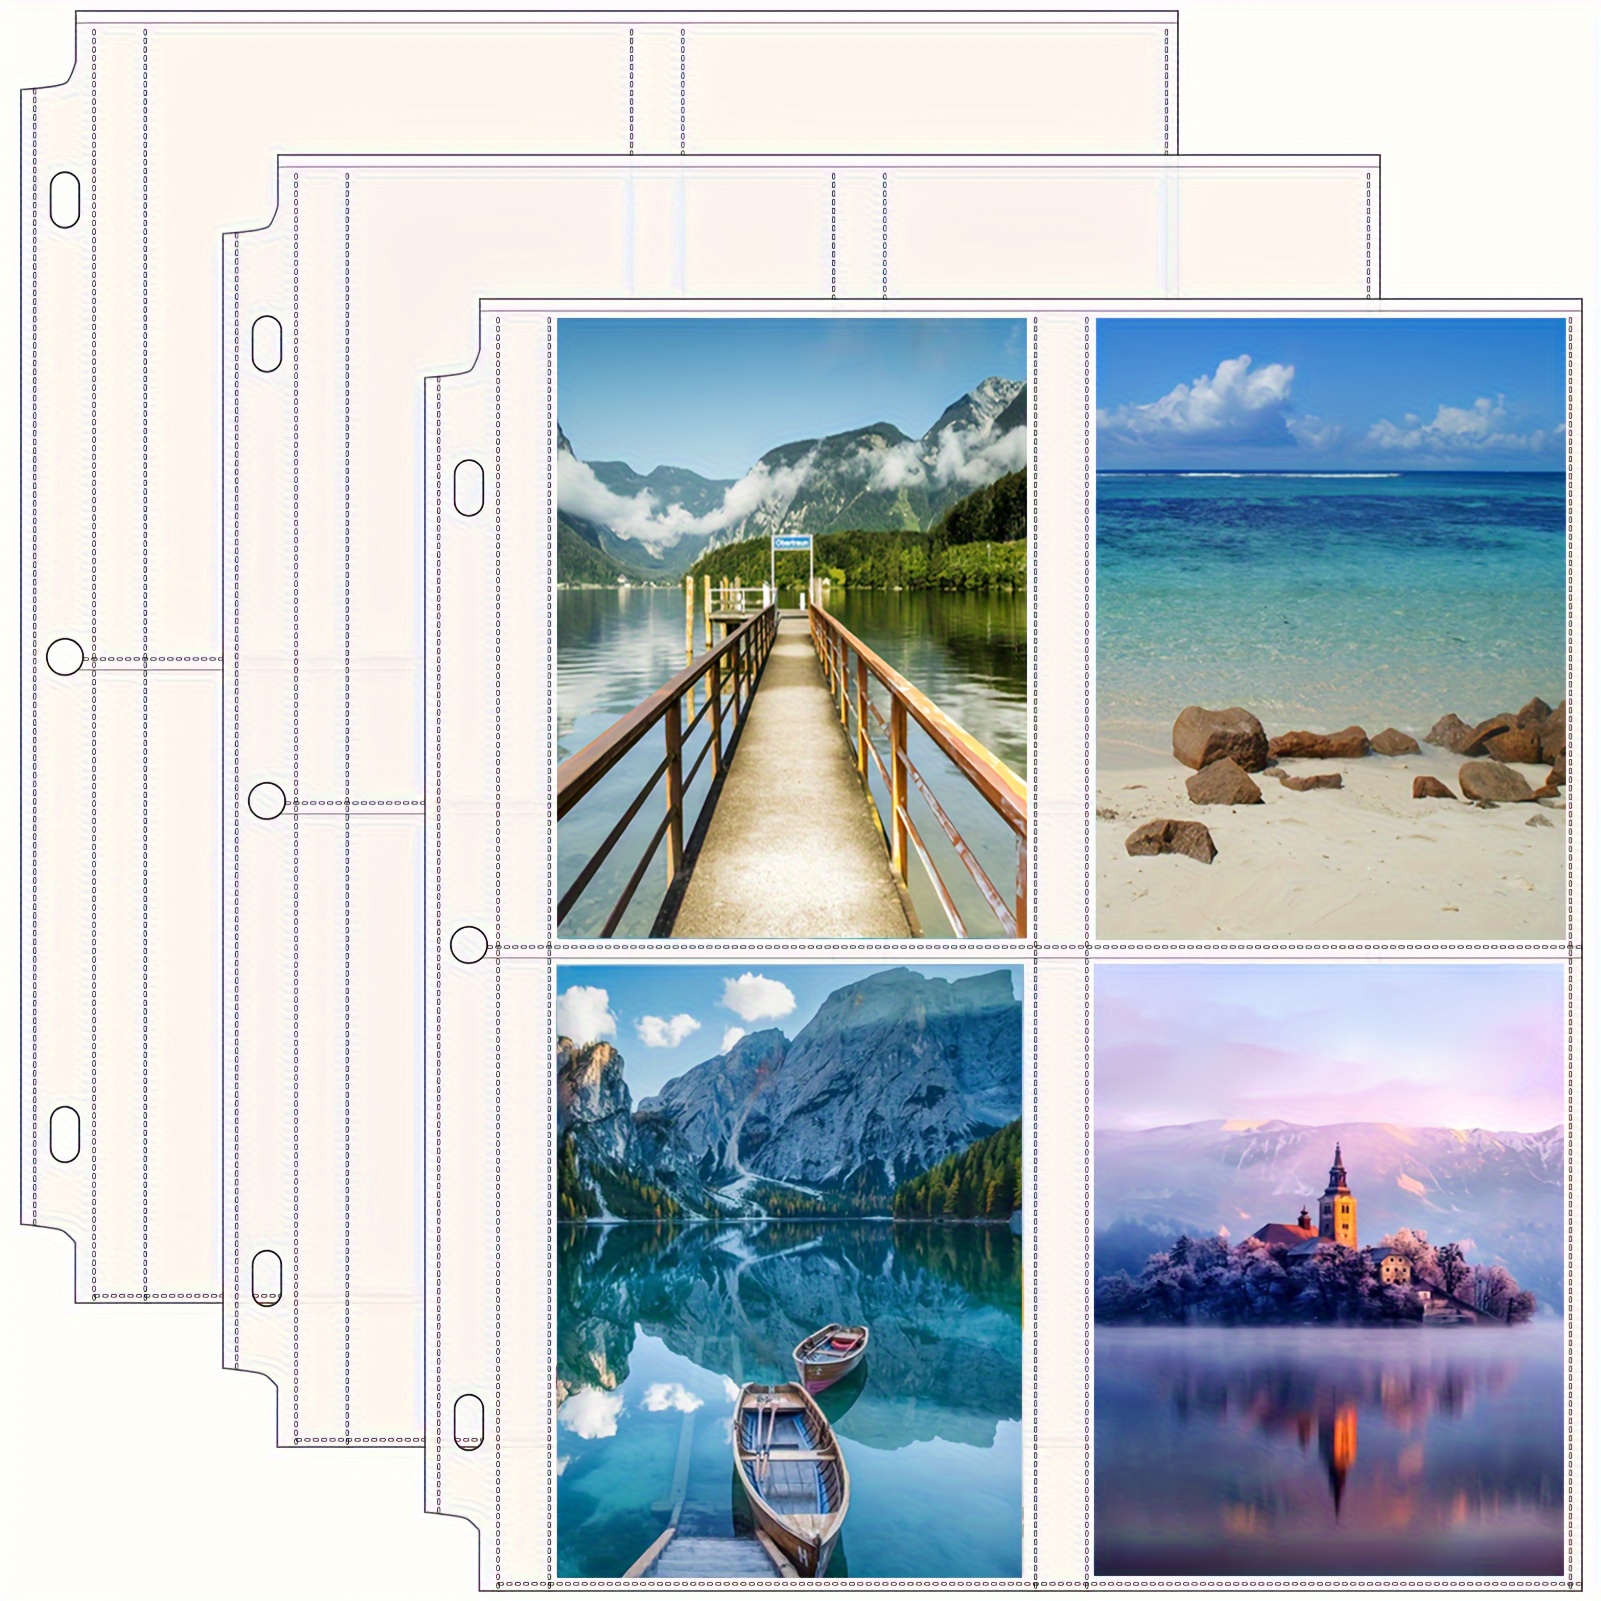 30 Pack 4x6 Photo Sleeves For 3 Ring Binder (archival)